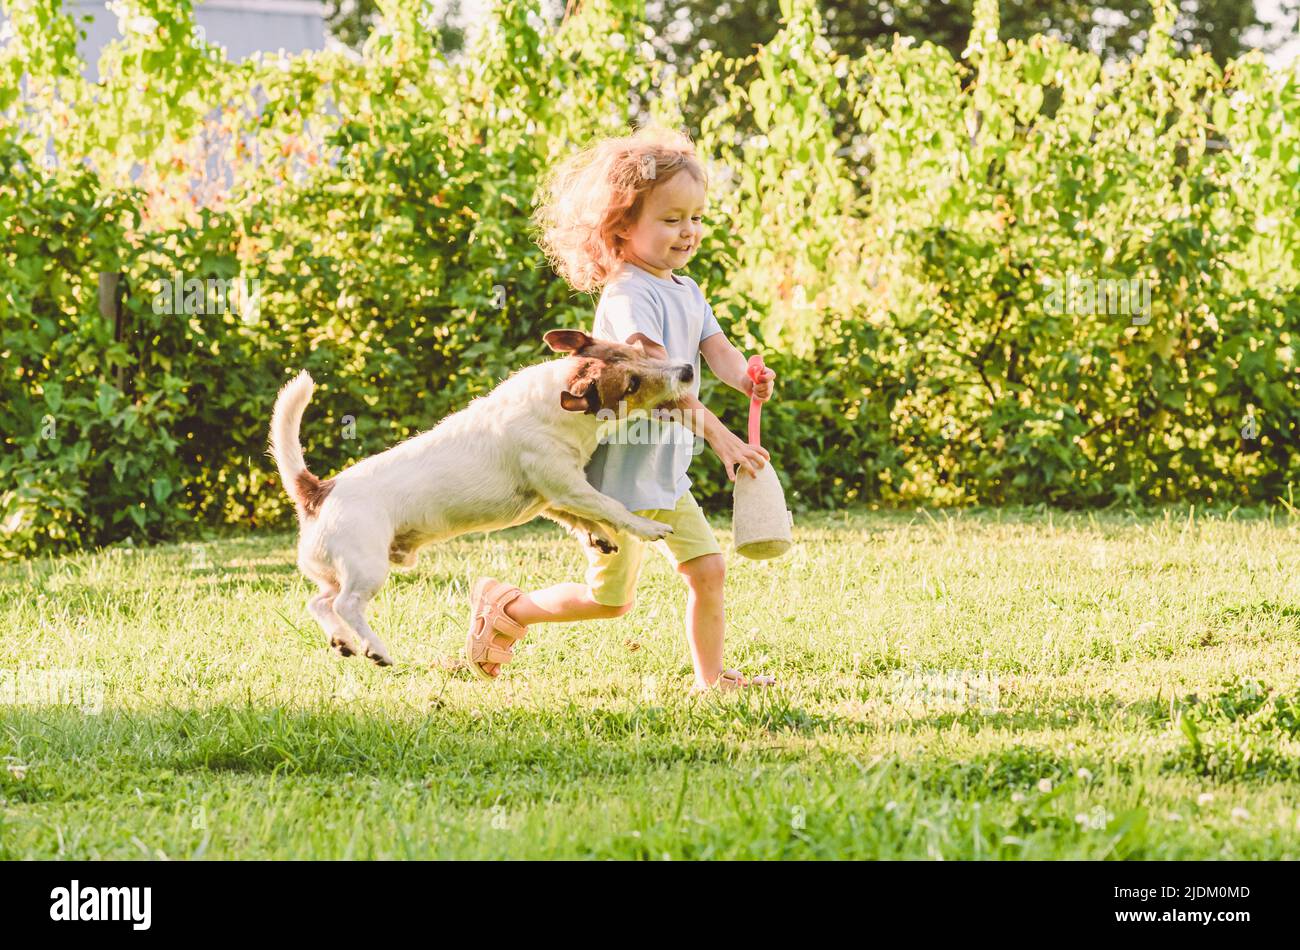 Domestic dog accidentally biting little girl's arm during game at backyard lawn Stock Photo